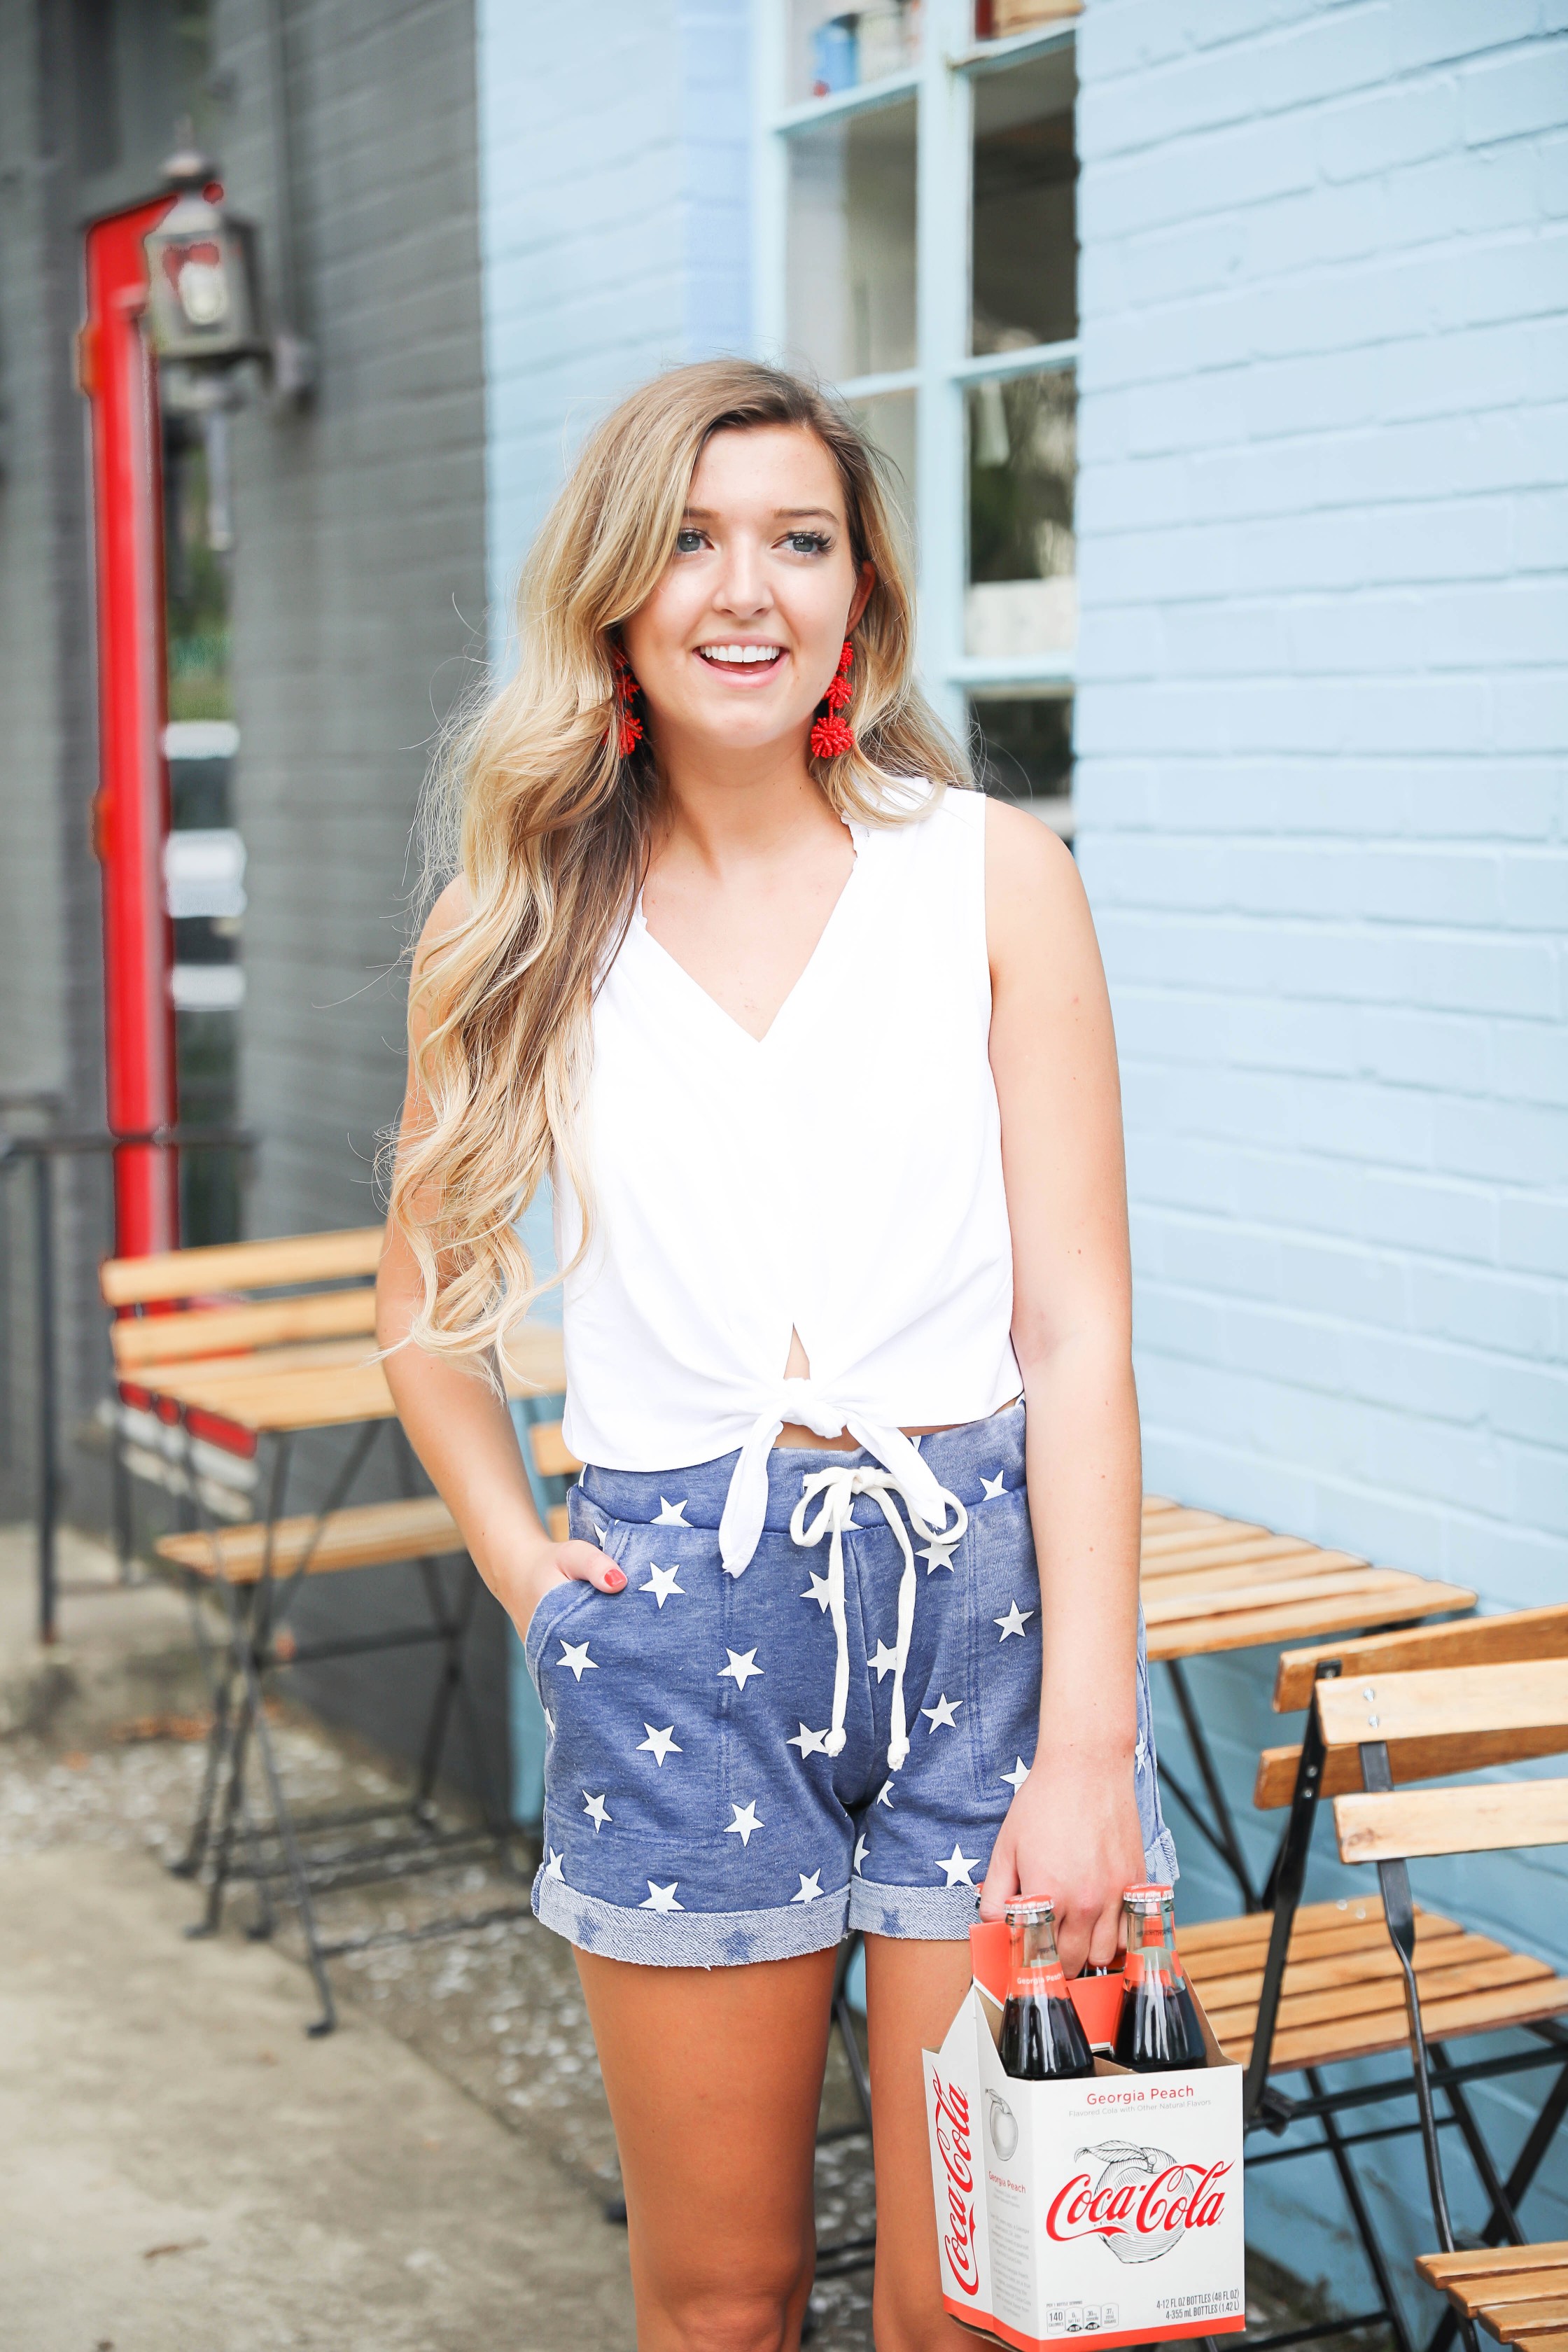 Fourth of july outfit inspo! I love these comfy blue star shorts! I paired it with this cute tied top! Such a fun coke bottle photoshoot! Red, white, and blue outfit details on fashion blogger daily dose of charm by lauren lindmark